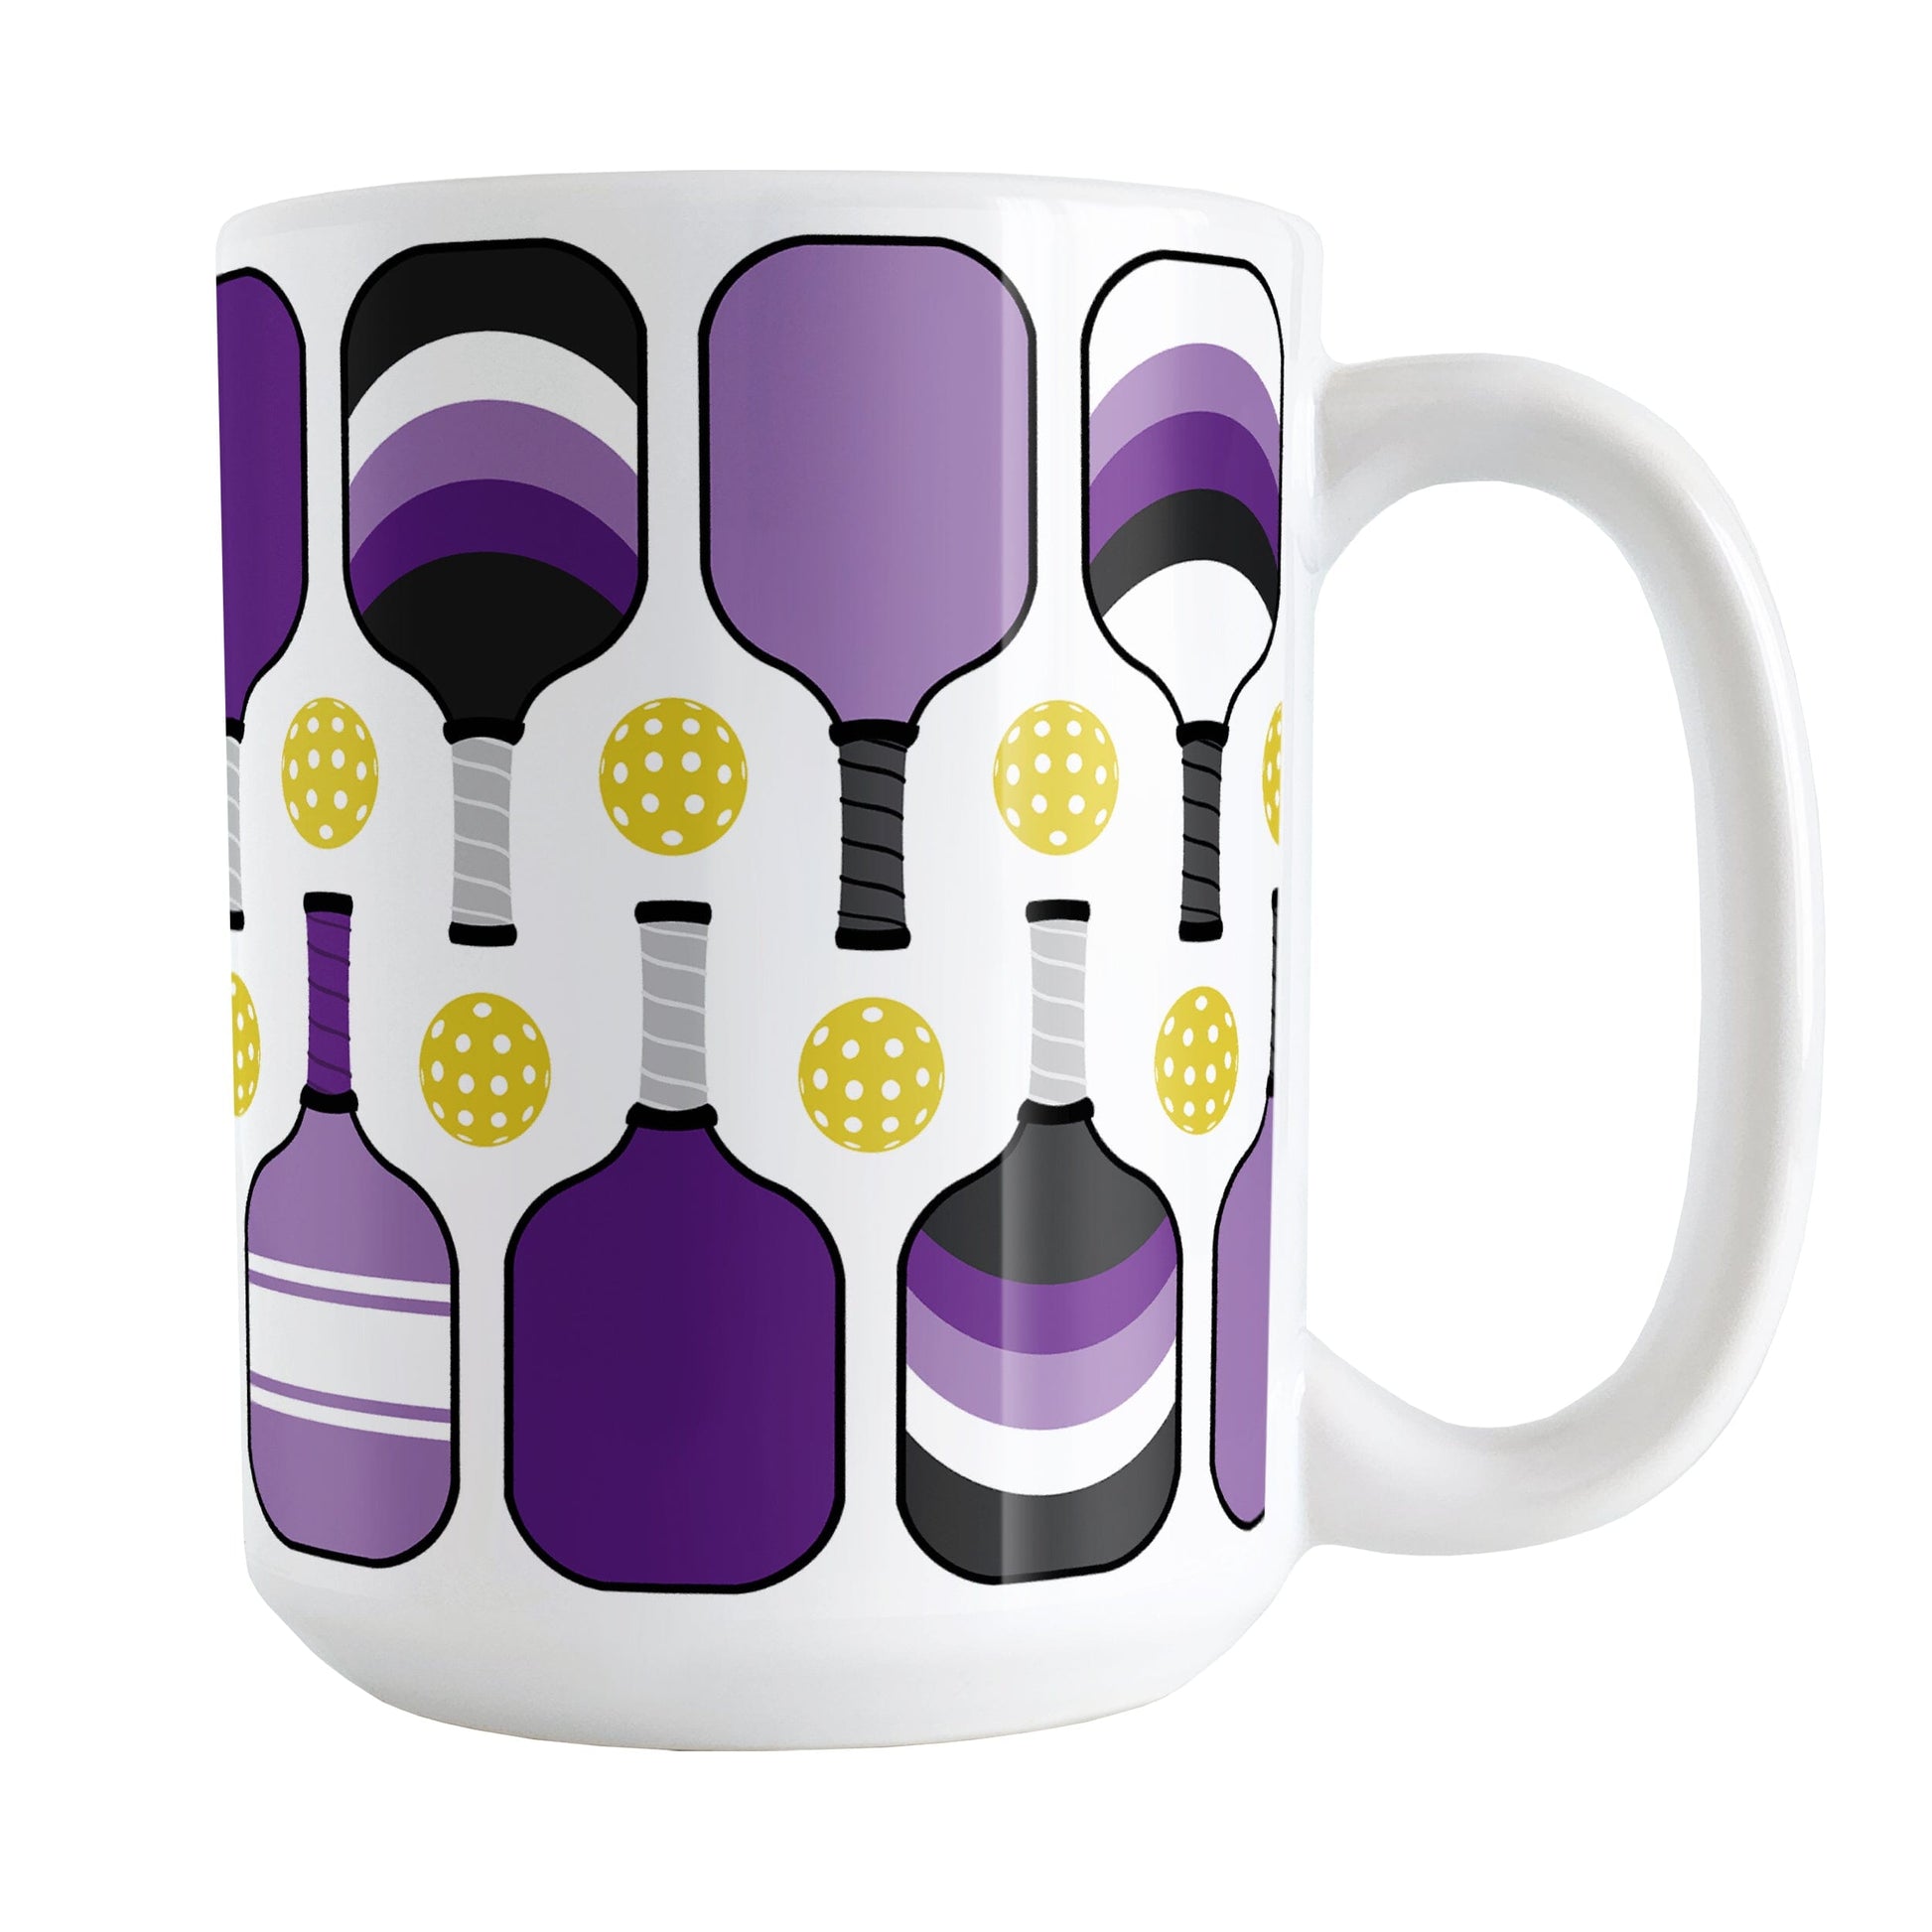 Purple Pickleball Mug (15oz) at Amy's Coffee Mugs. A ceramic coffee mug designed with modern purple pickleball paddles and yellow balls in a pattern that wraps around the mug up to the handle.